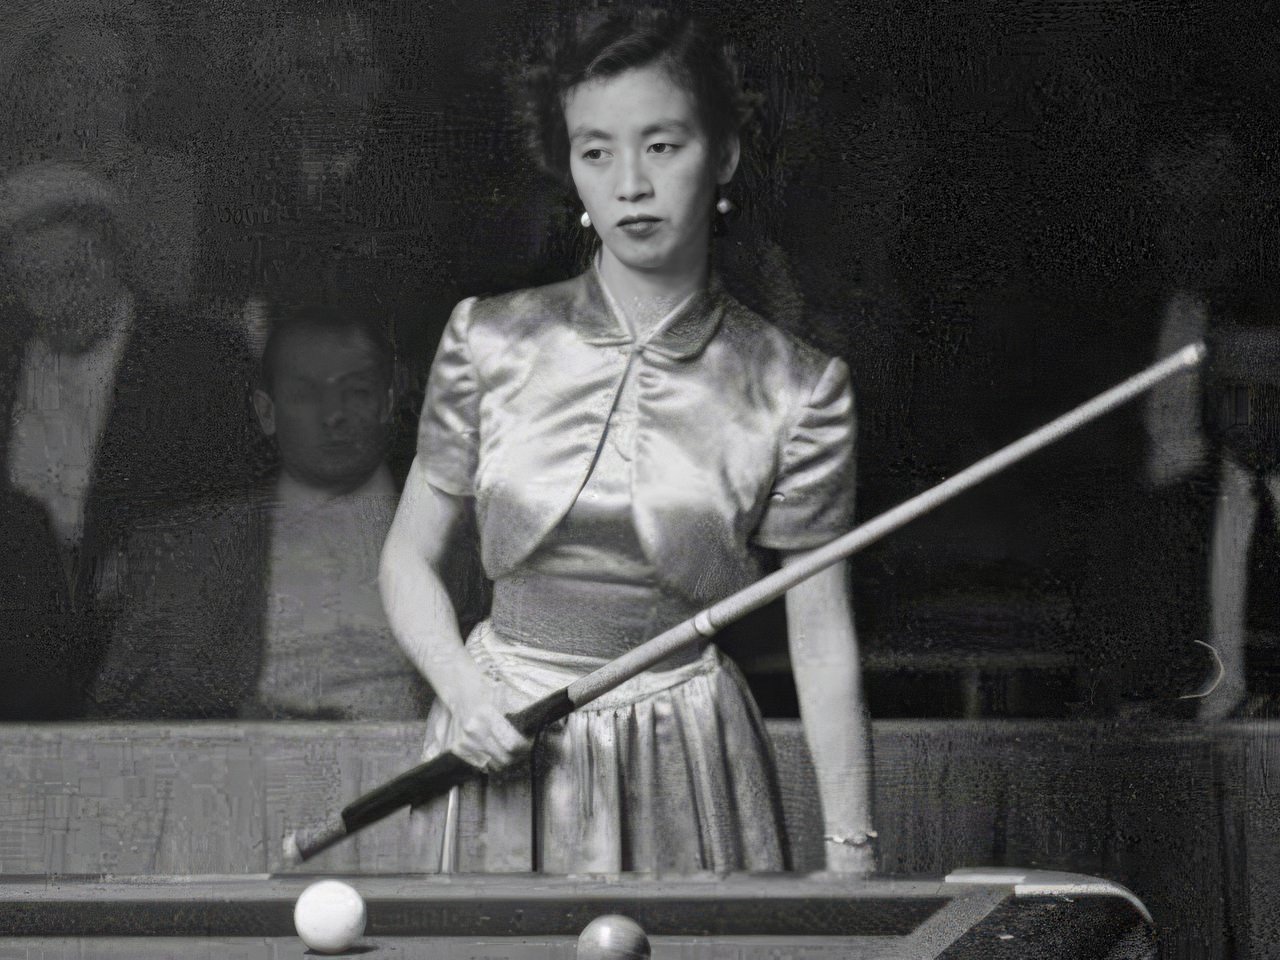 The Remarkable Story of Masako Katsura and Her Dominion Over the Billiards World in Japan